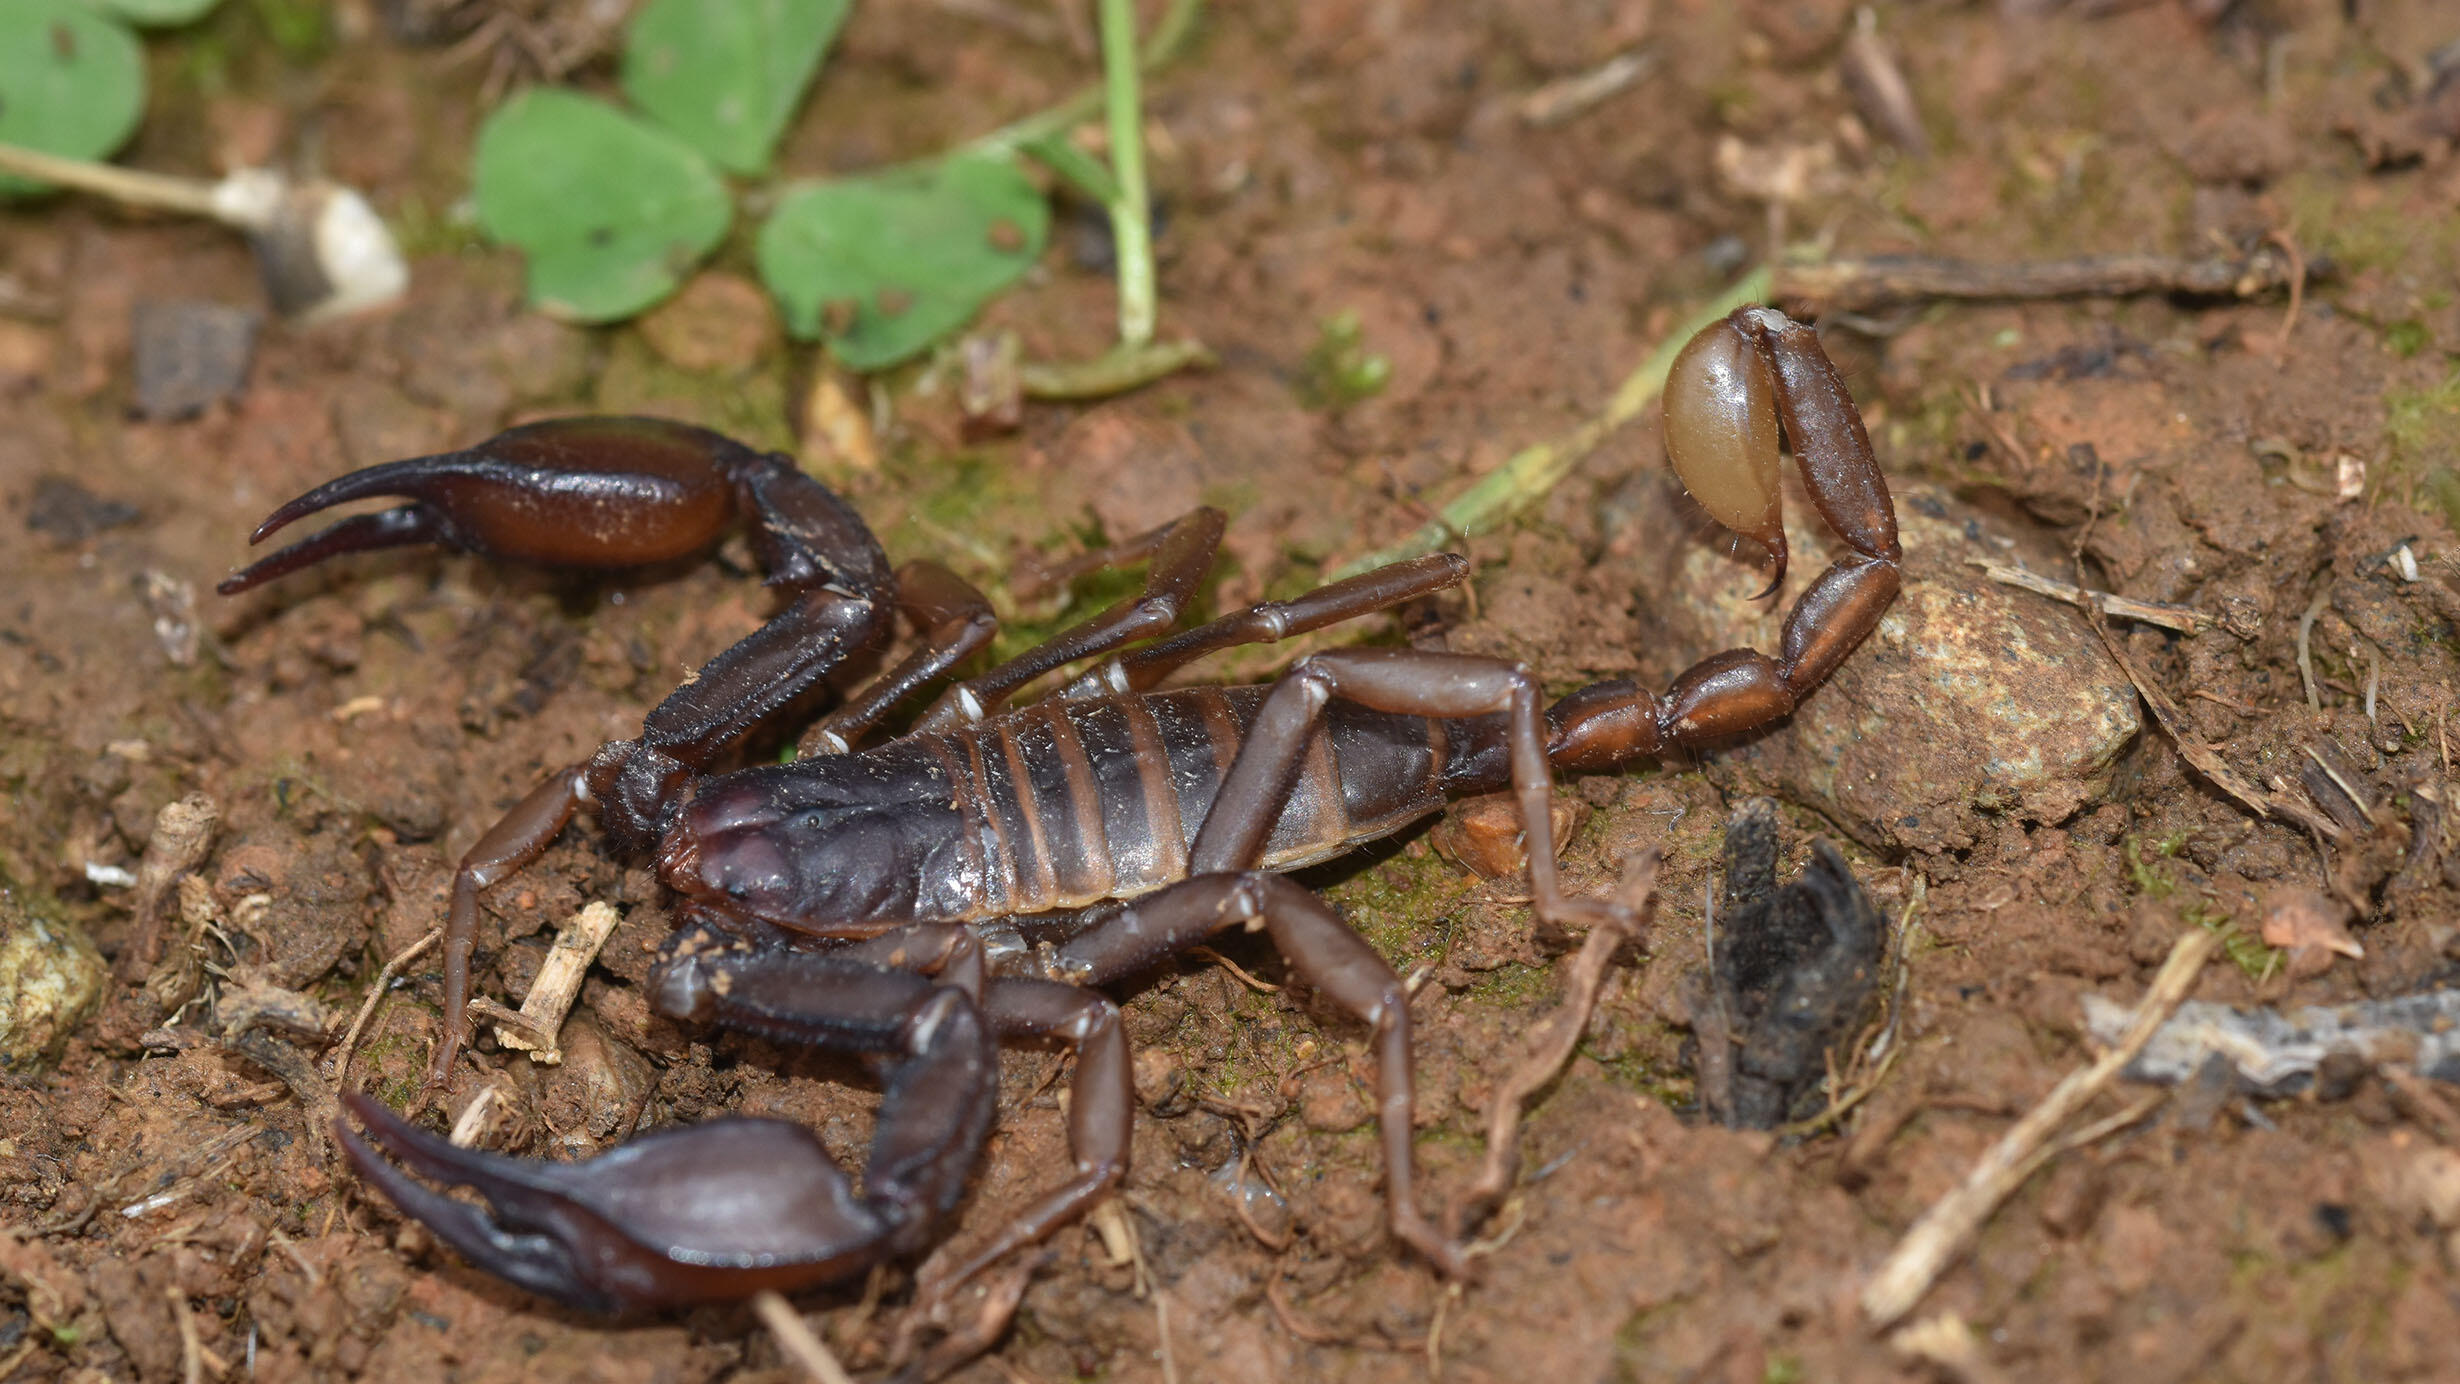 Close-up on a scorpion, a Euscorpius Olympus, on dirt.